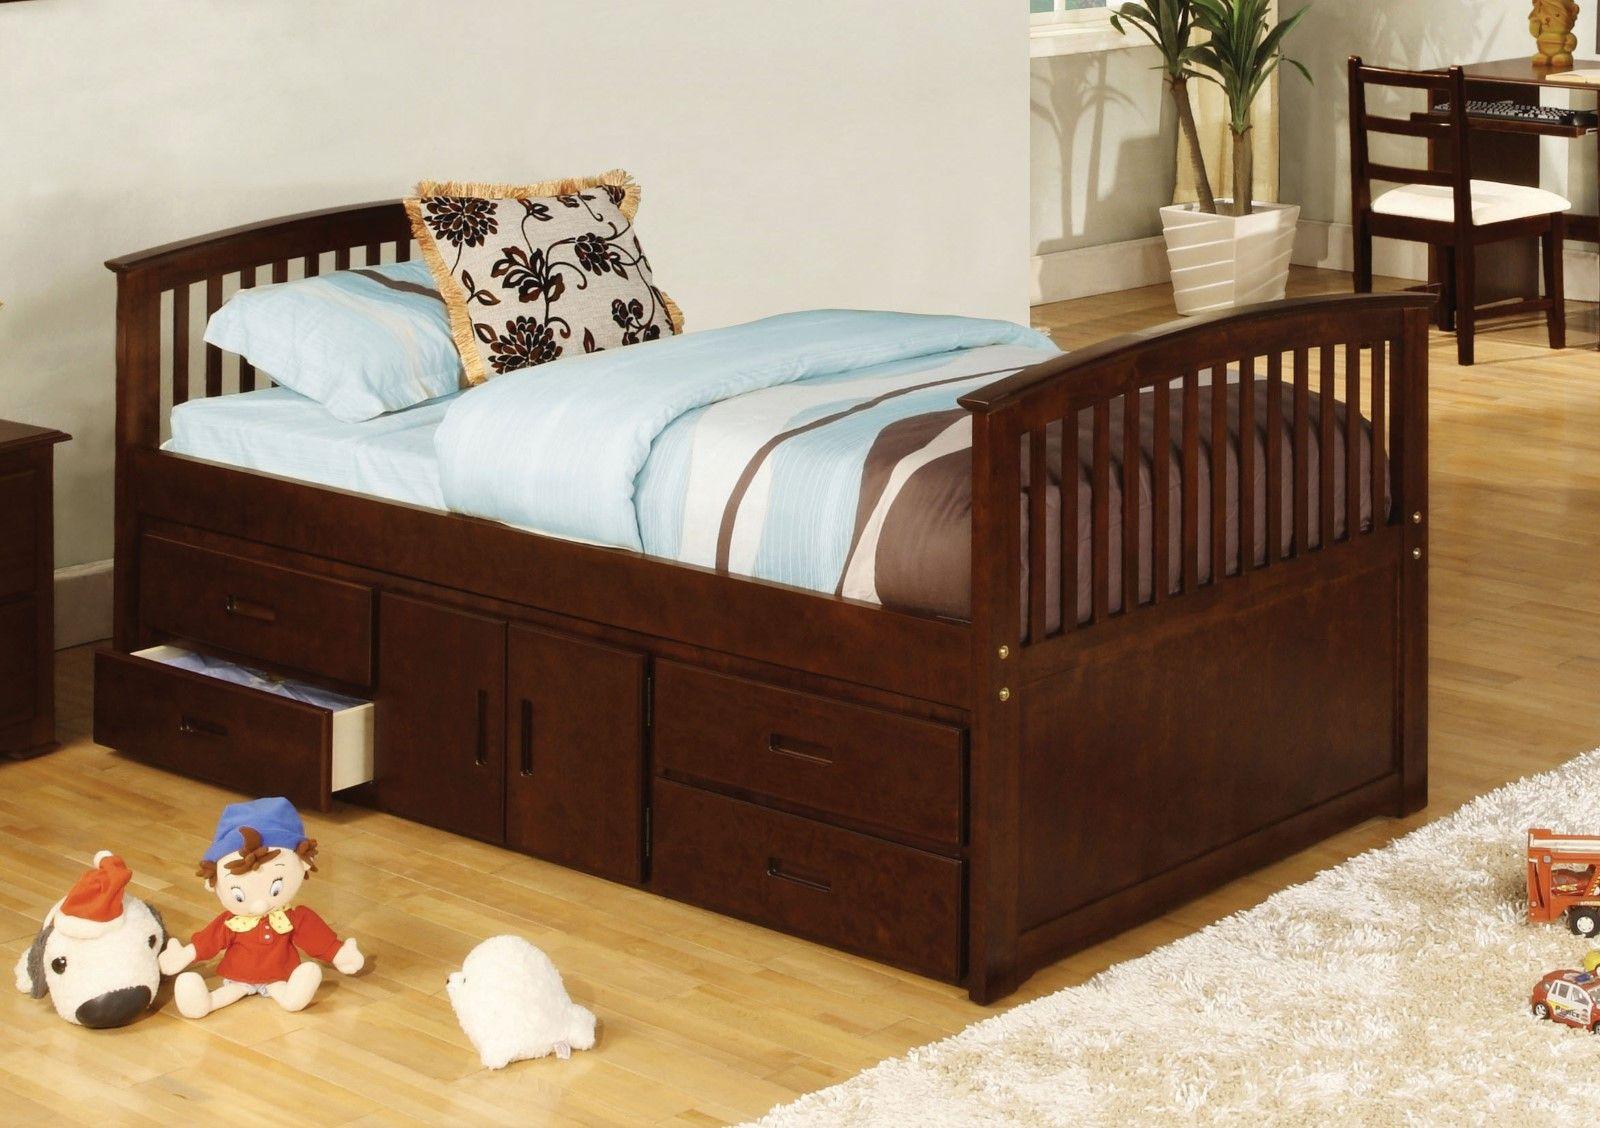 Furniture of America - Caballero - Captain Twin Bed With 4 Drawers & Storage - Dark Walnut - 5th Avenue Furniture